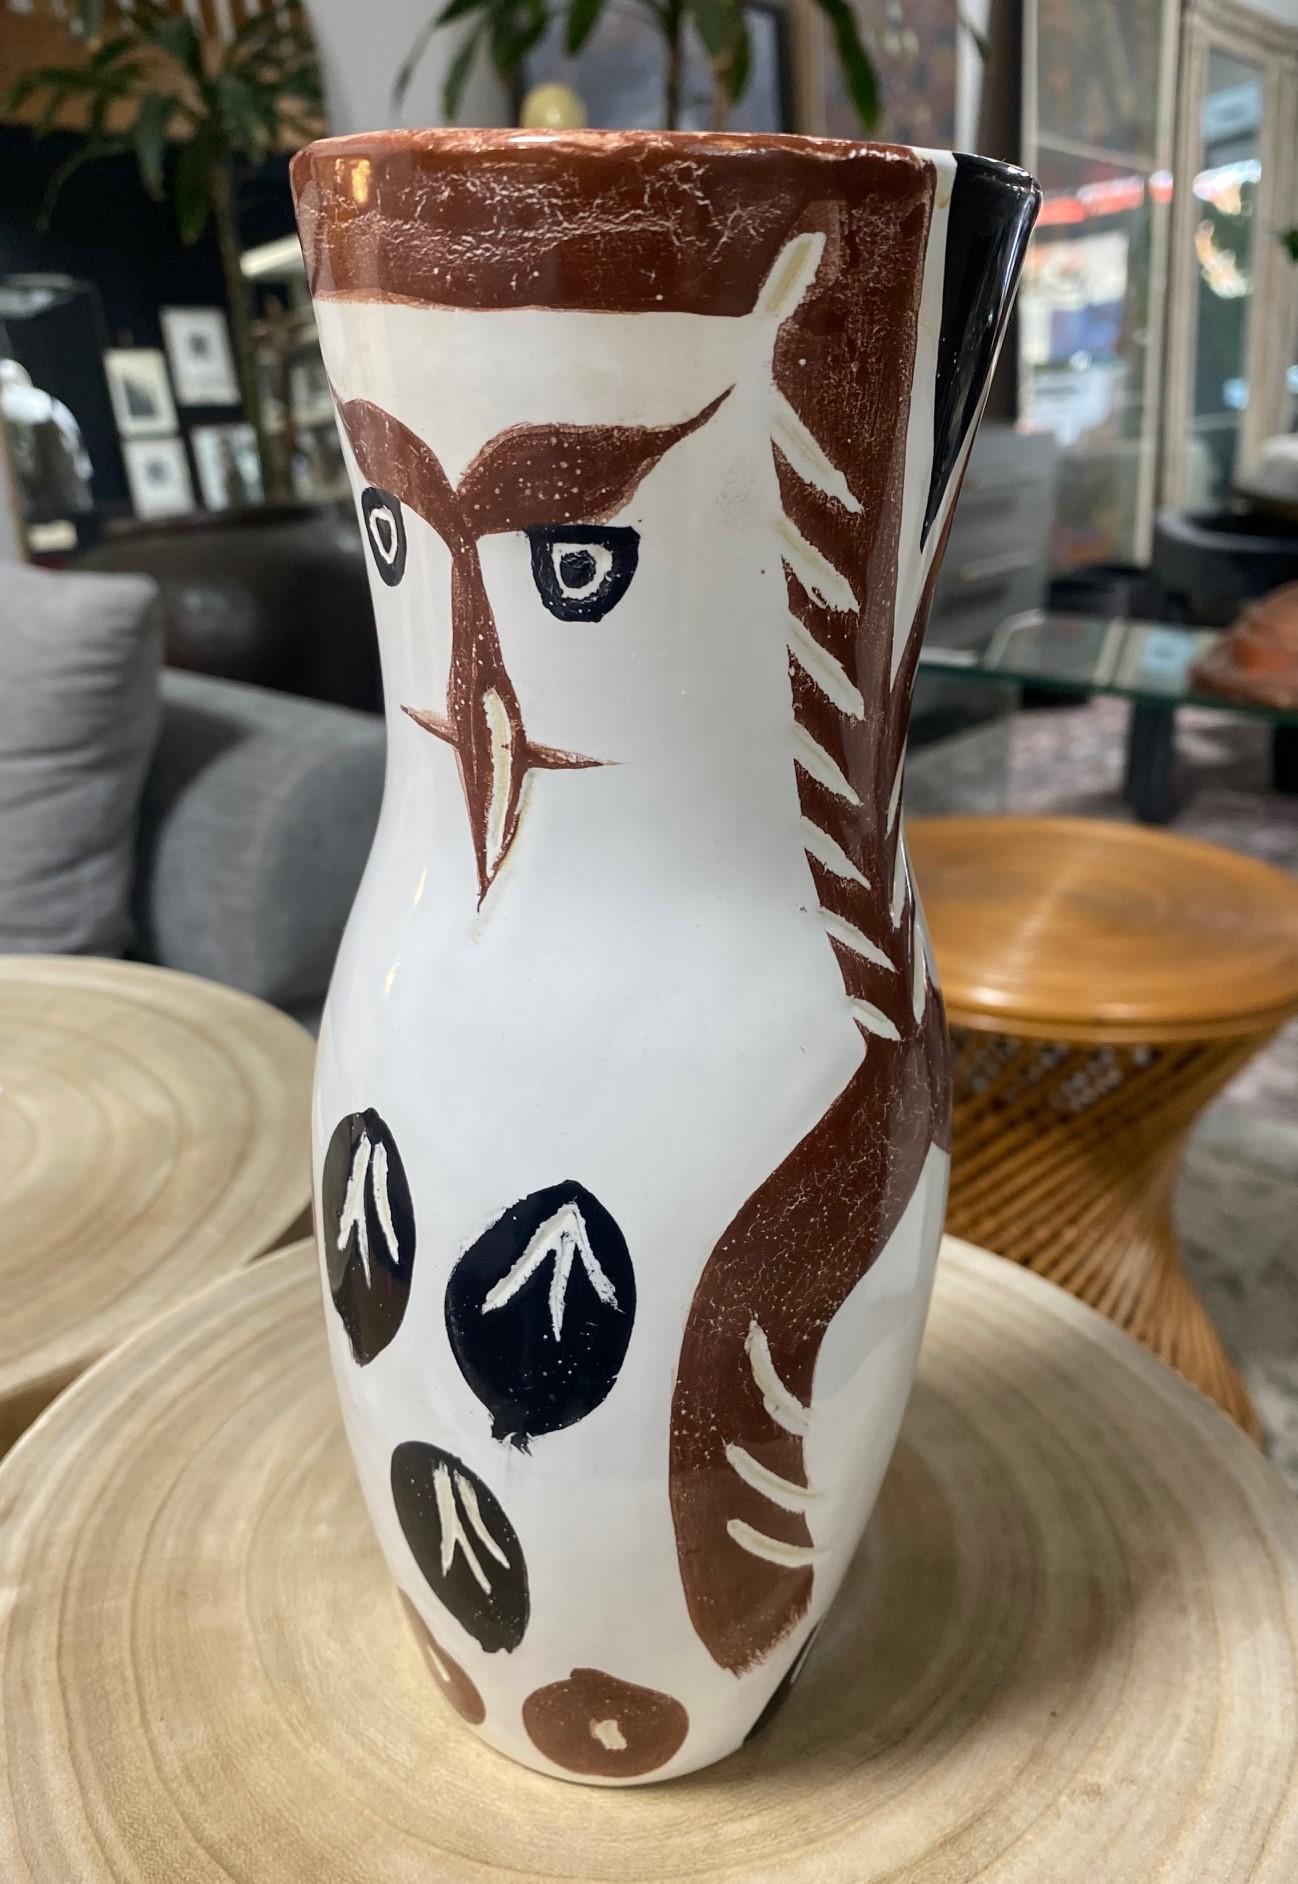 Pablo Picasso Signed Limited Madoura Pottery Chouetton Owl Vase A.R. 135, 1952 For Sale 3